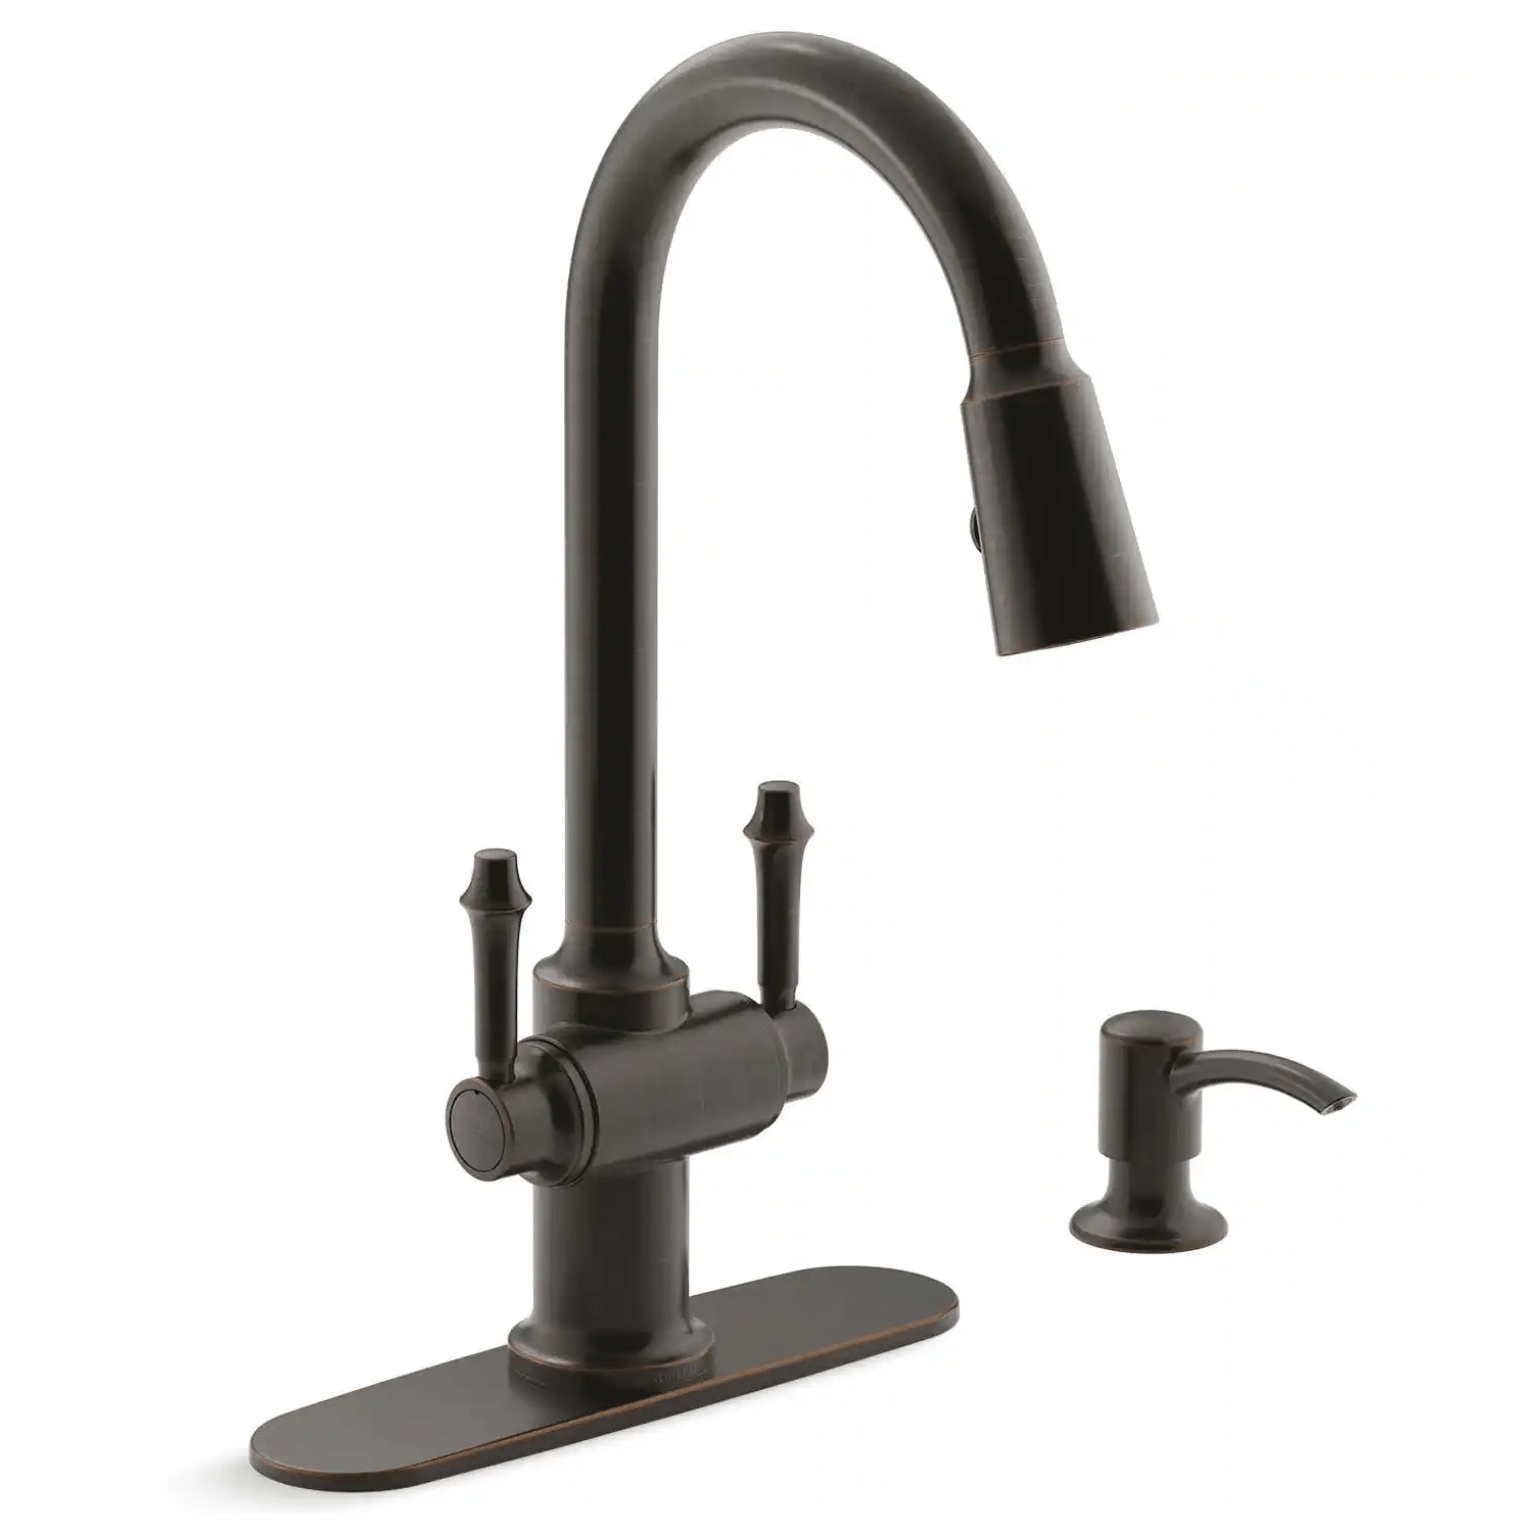 Kohler Thierry Two Handle Pull-Down Sprayer Kitchen Faucet with Soap Dispenser in Oil-Rubbed Bronze